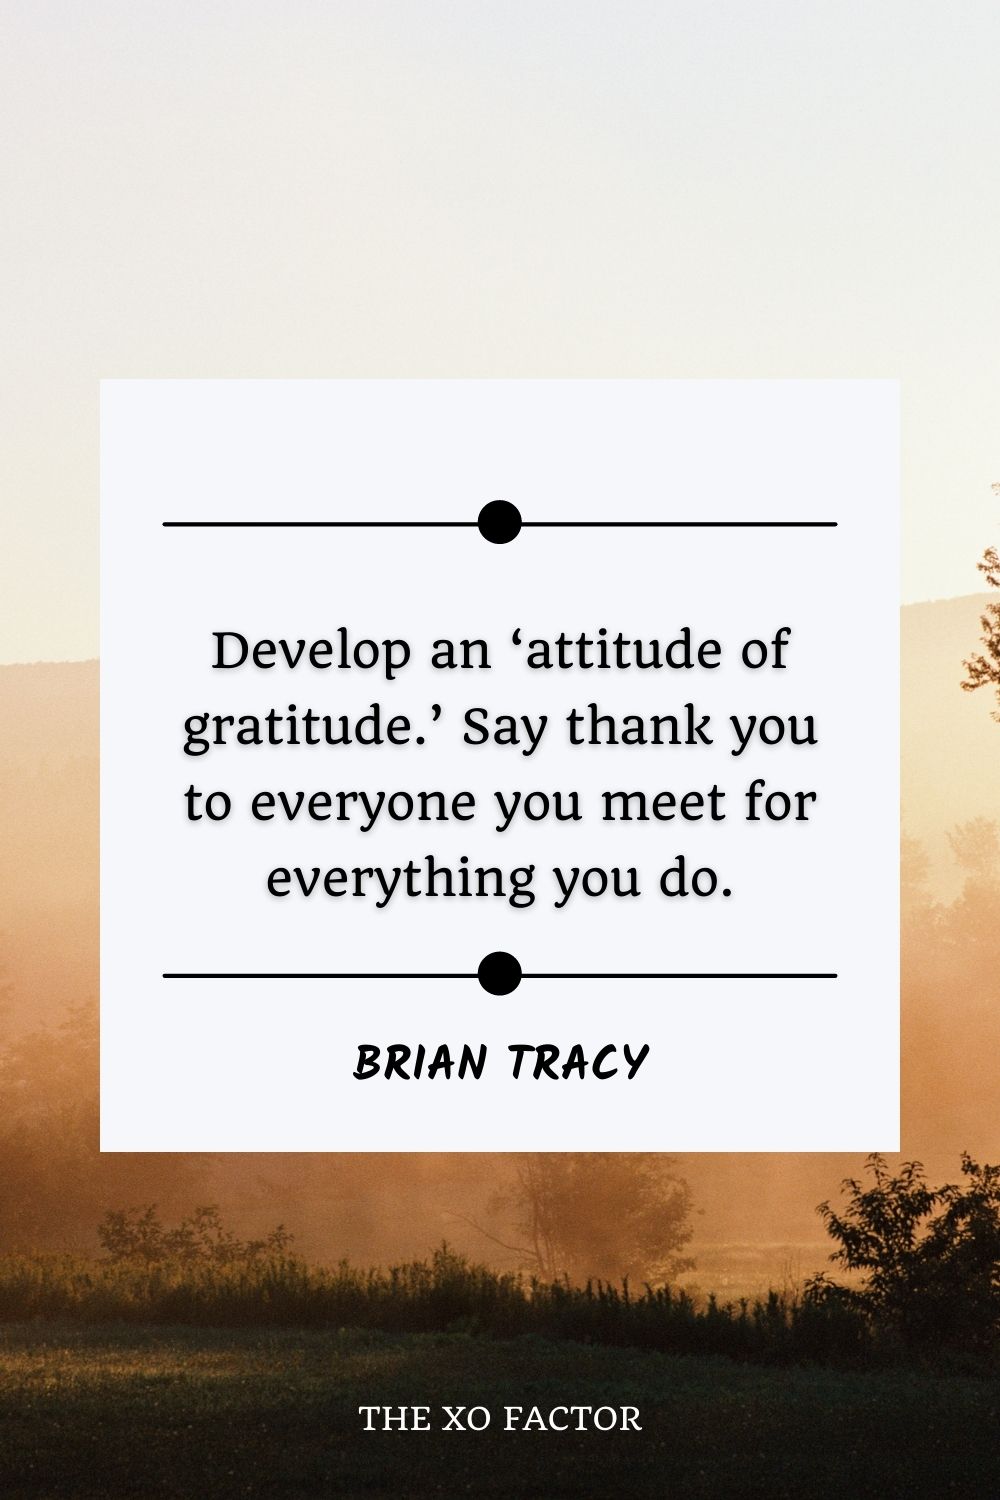 Develop an ‘attitude of gratitude.’ Say thank you to everyone you meet for everything you do.” – Brian Tracy